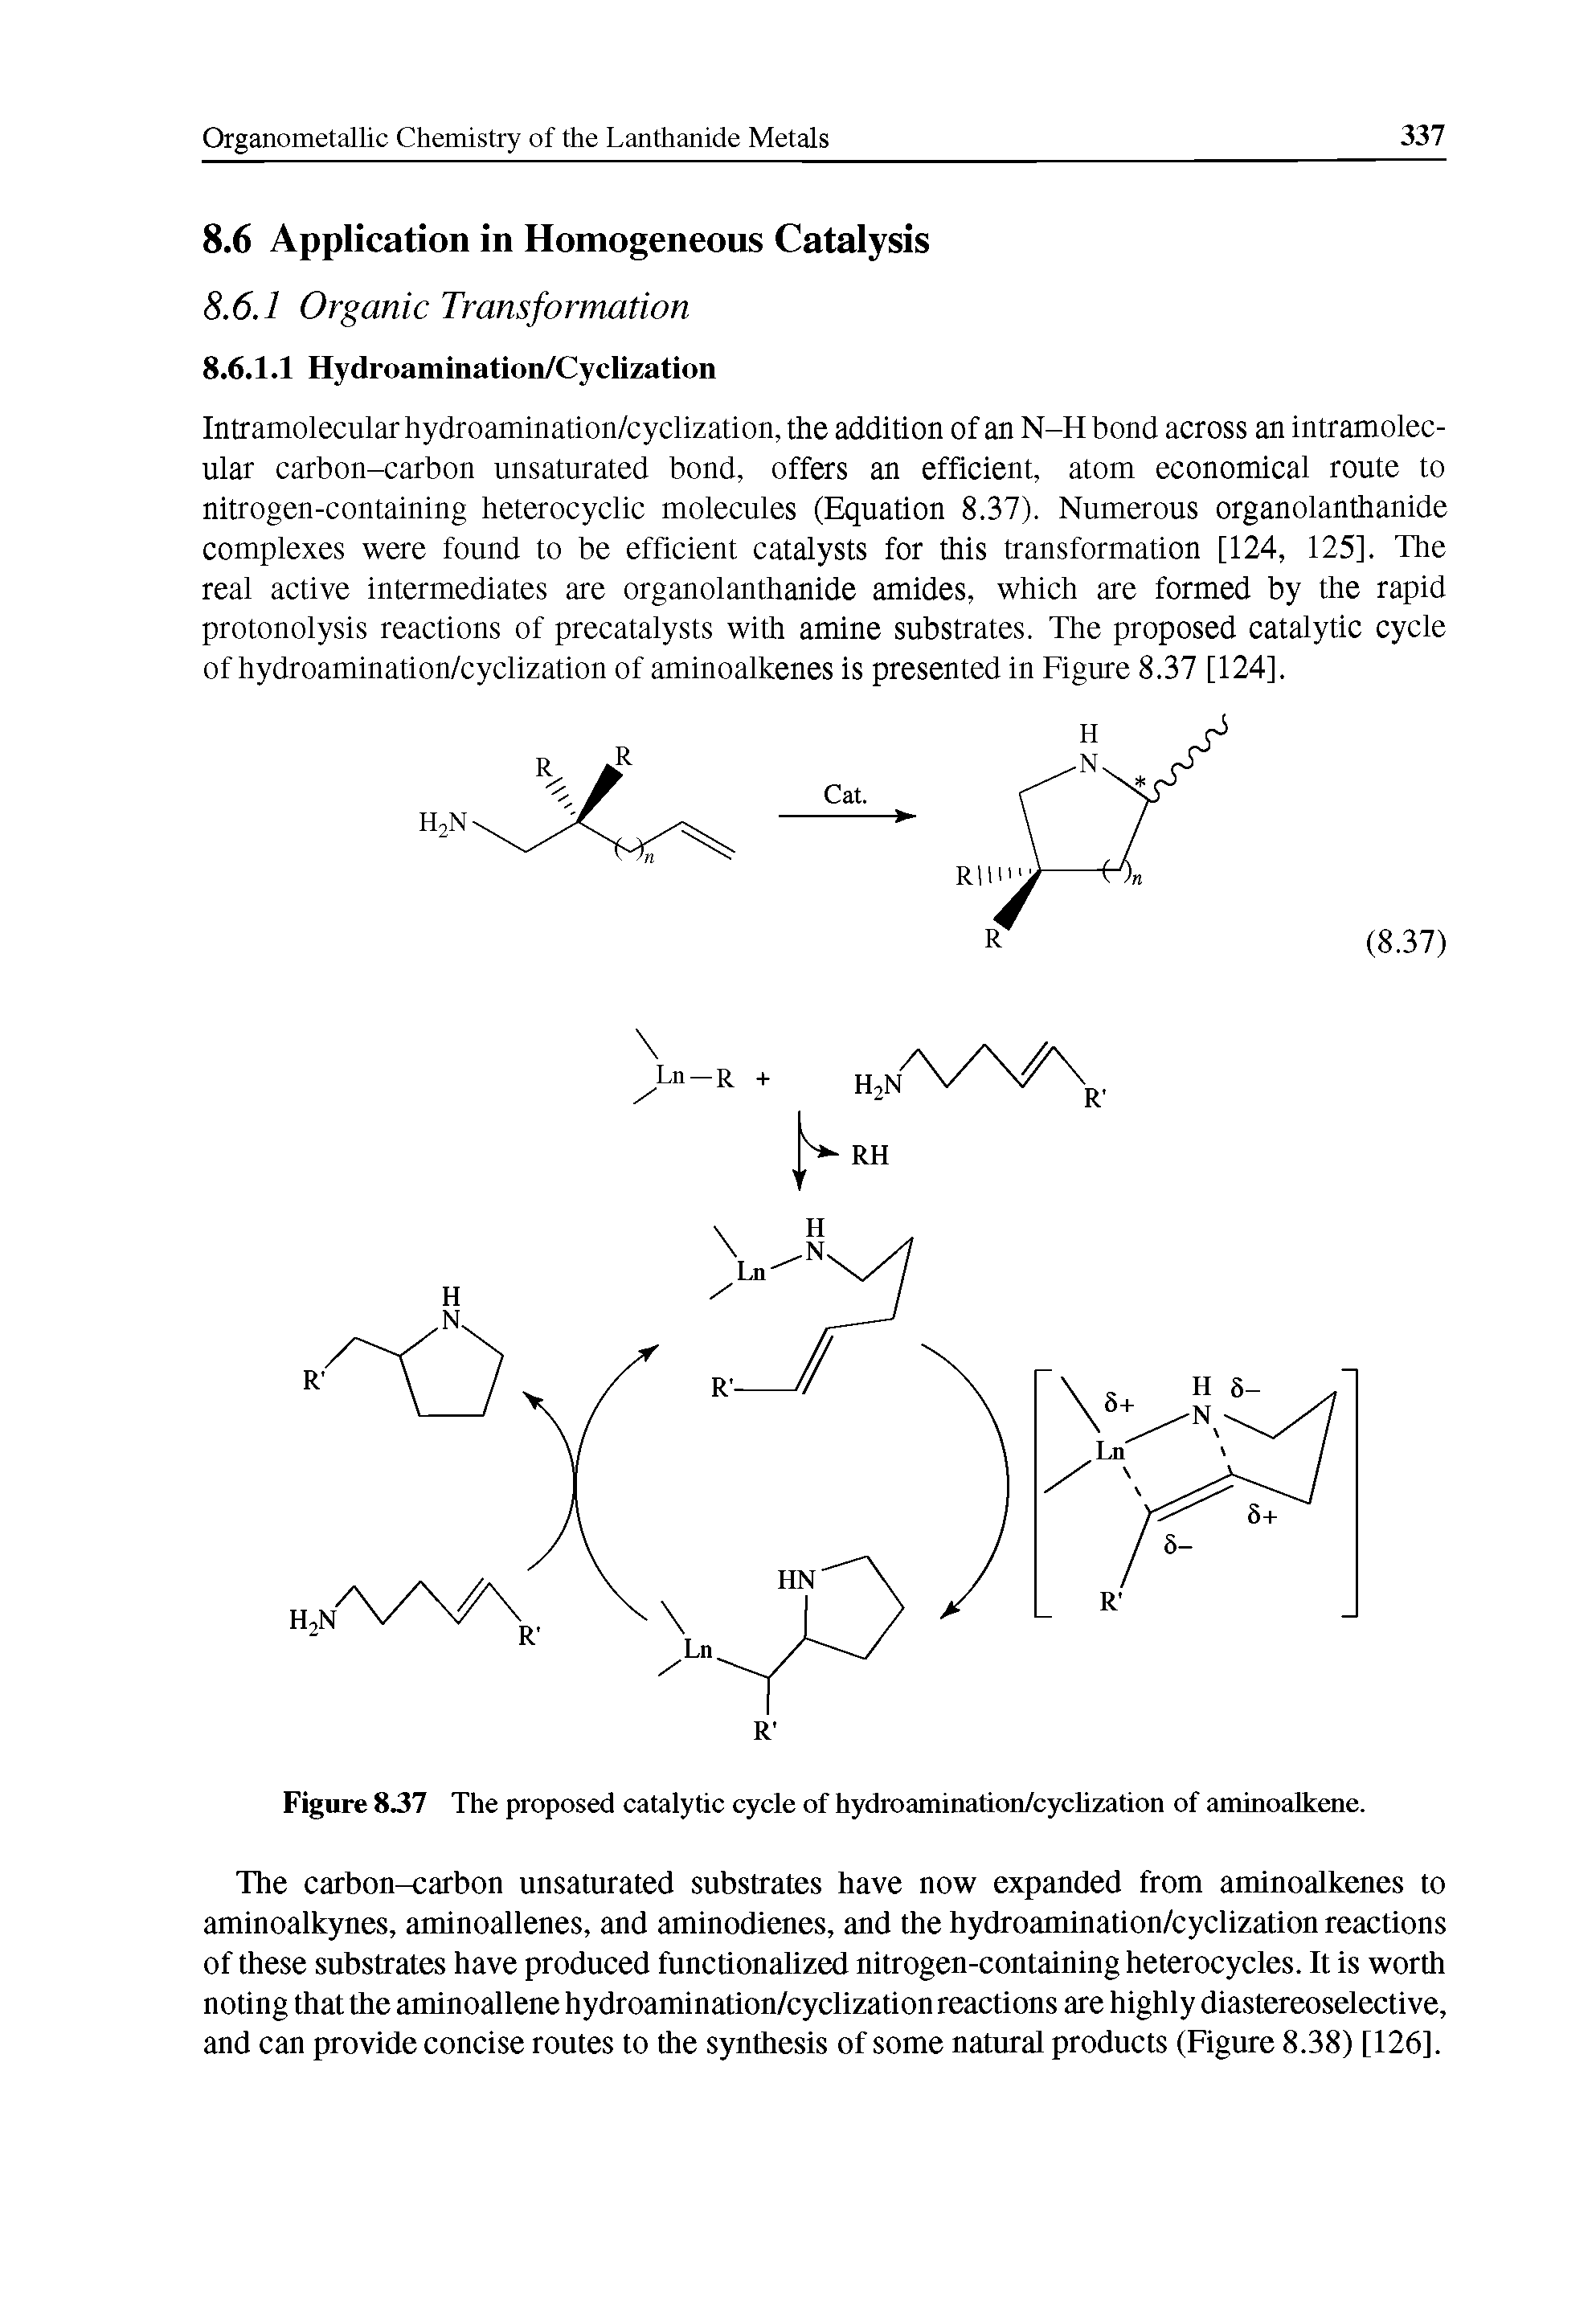 Figure 837 The proposed catalytic cycle of hydroamination/cyclization of aminoalkene.